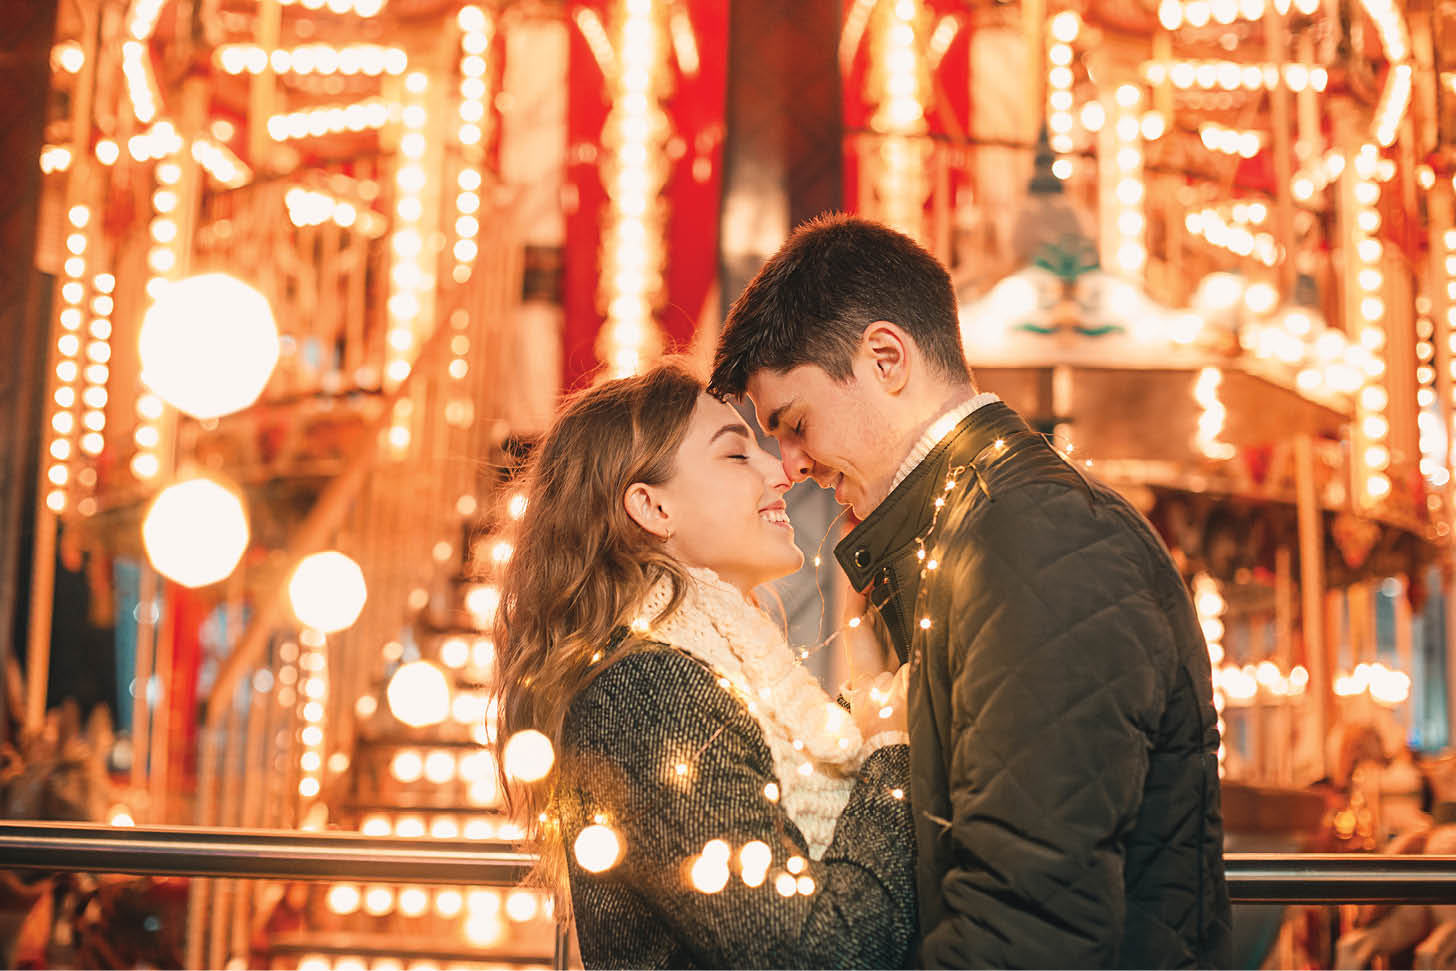 Young couple kissing and hugging outdoor in night street at christmas time at city